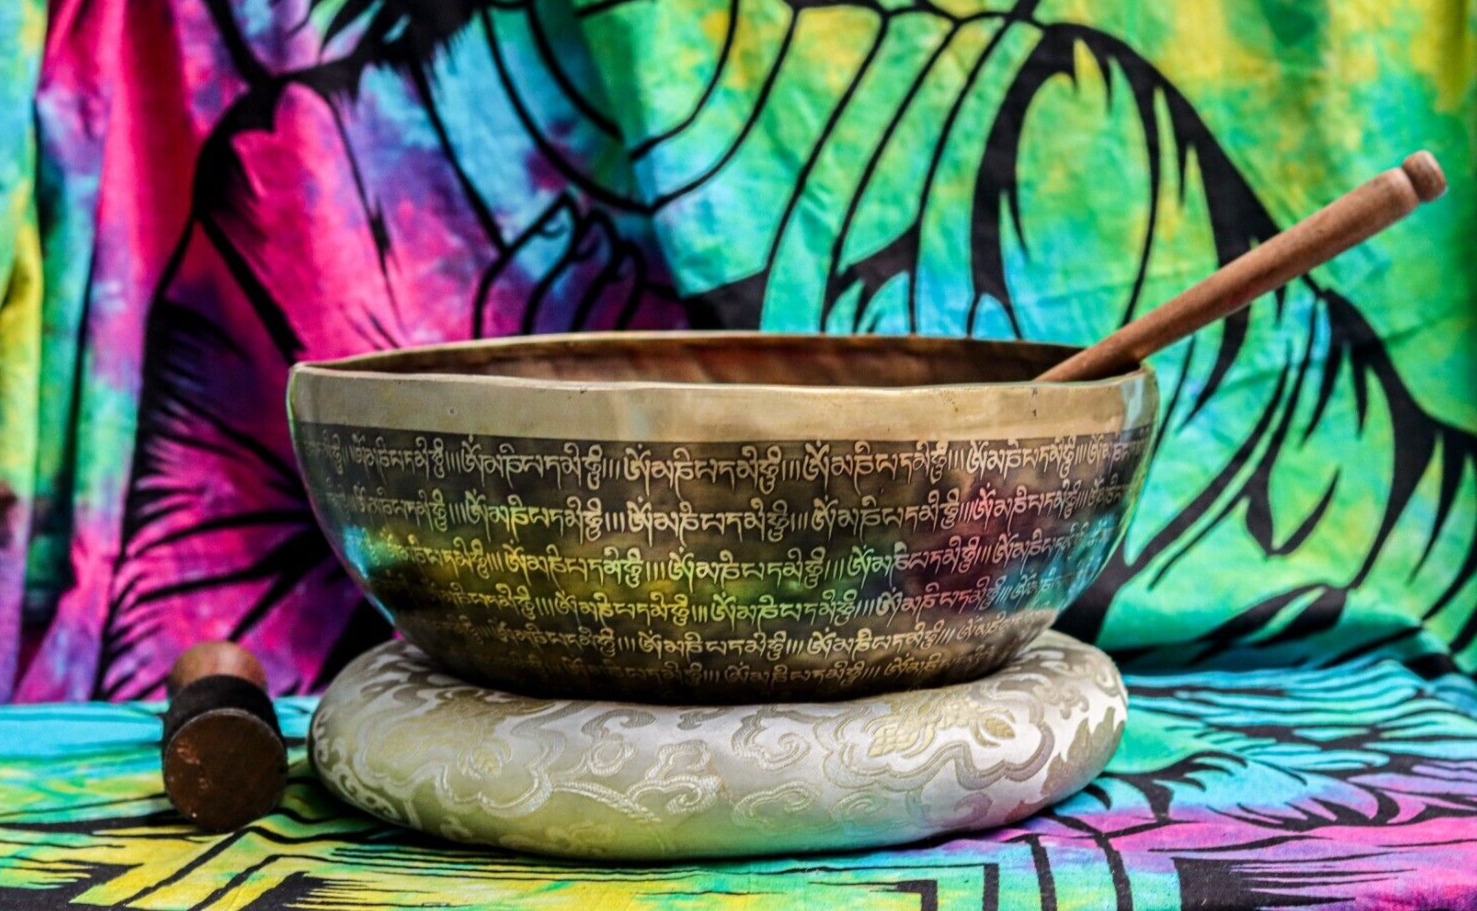 Sale 13 inches Flower of life with Full Mantra Carving Tibetan singing bowl